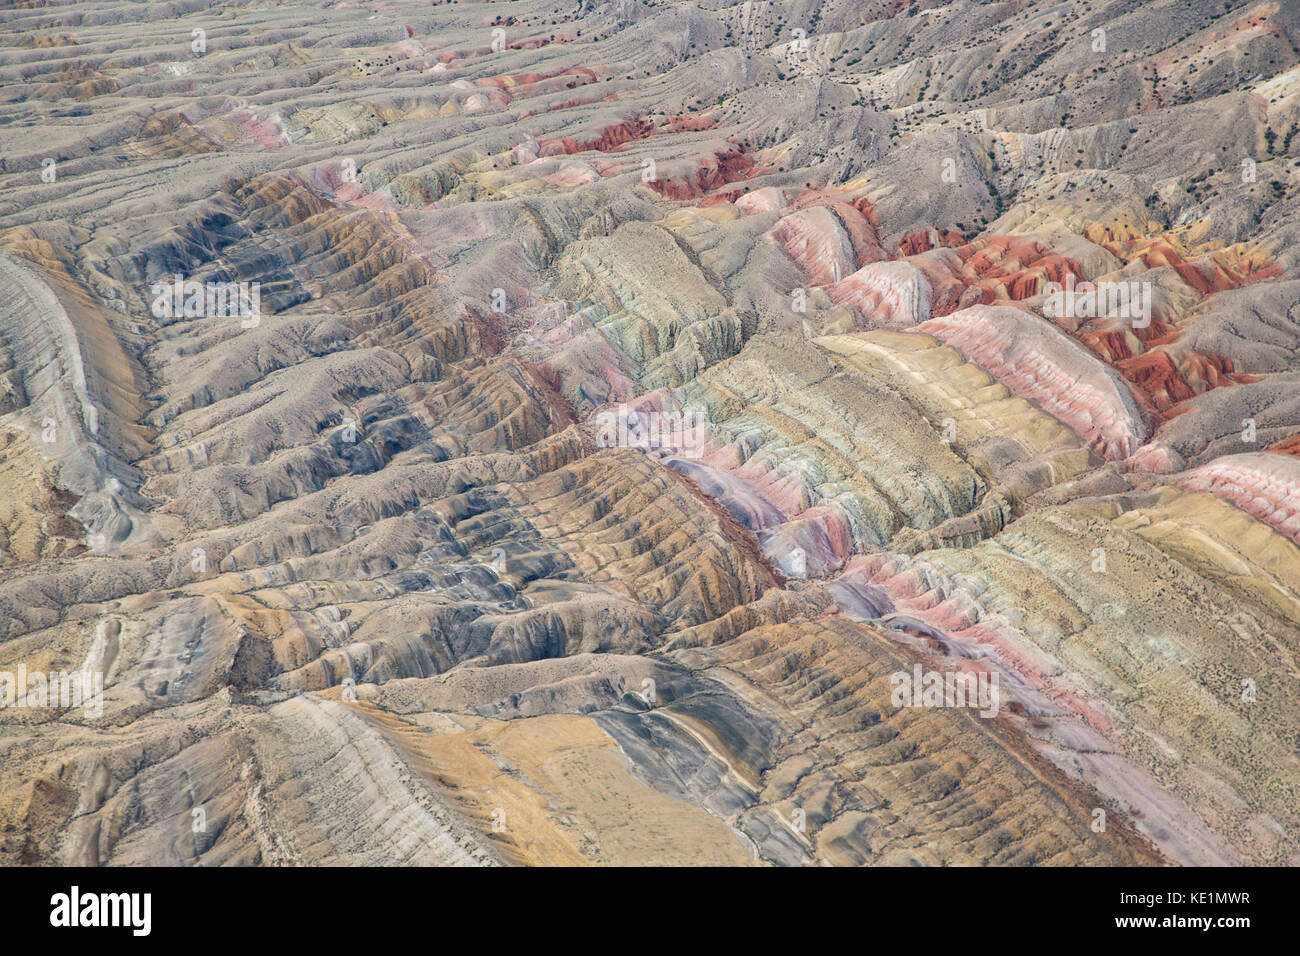 Aerial view of the Sheep Mountain Anticline in Wyoming with layers of sedimentary rocks Stock Photo